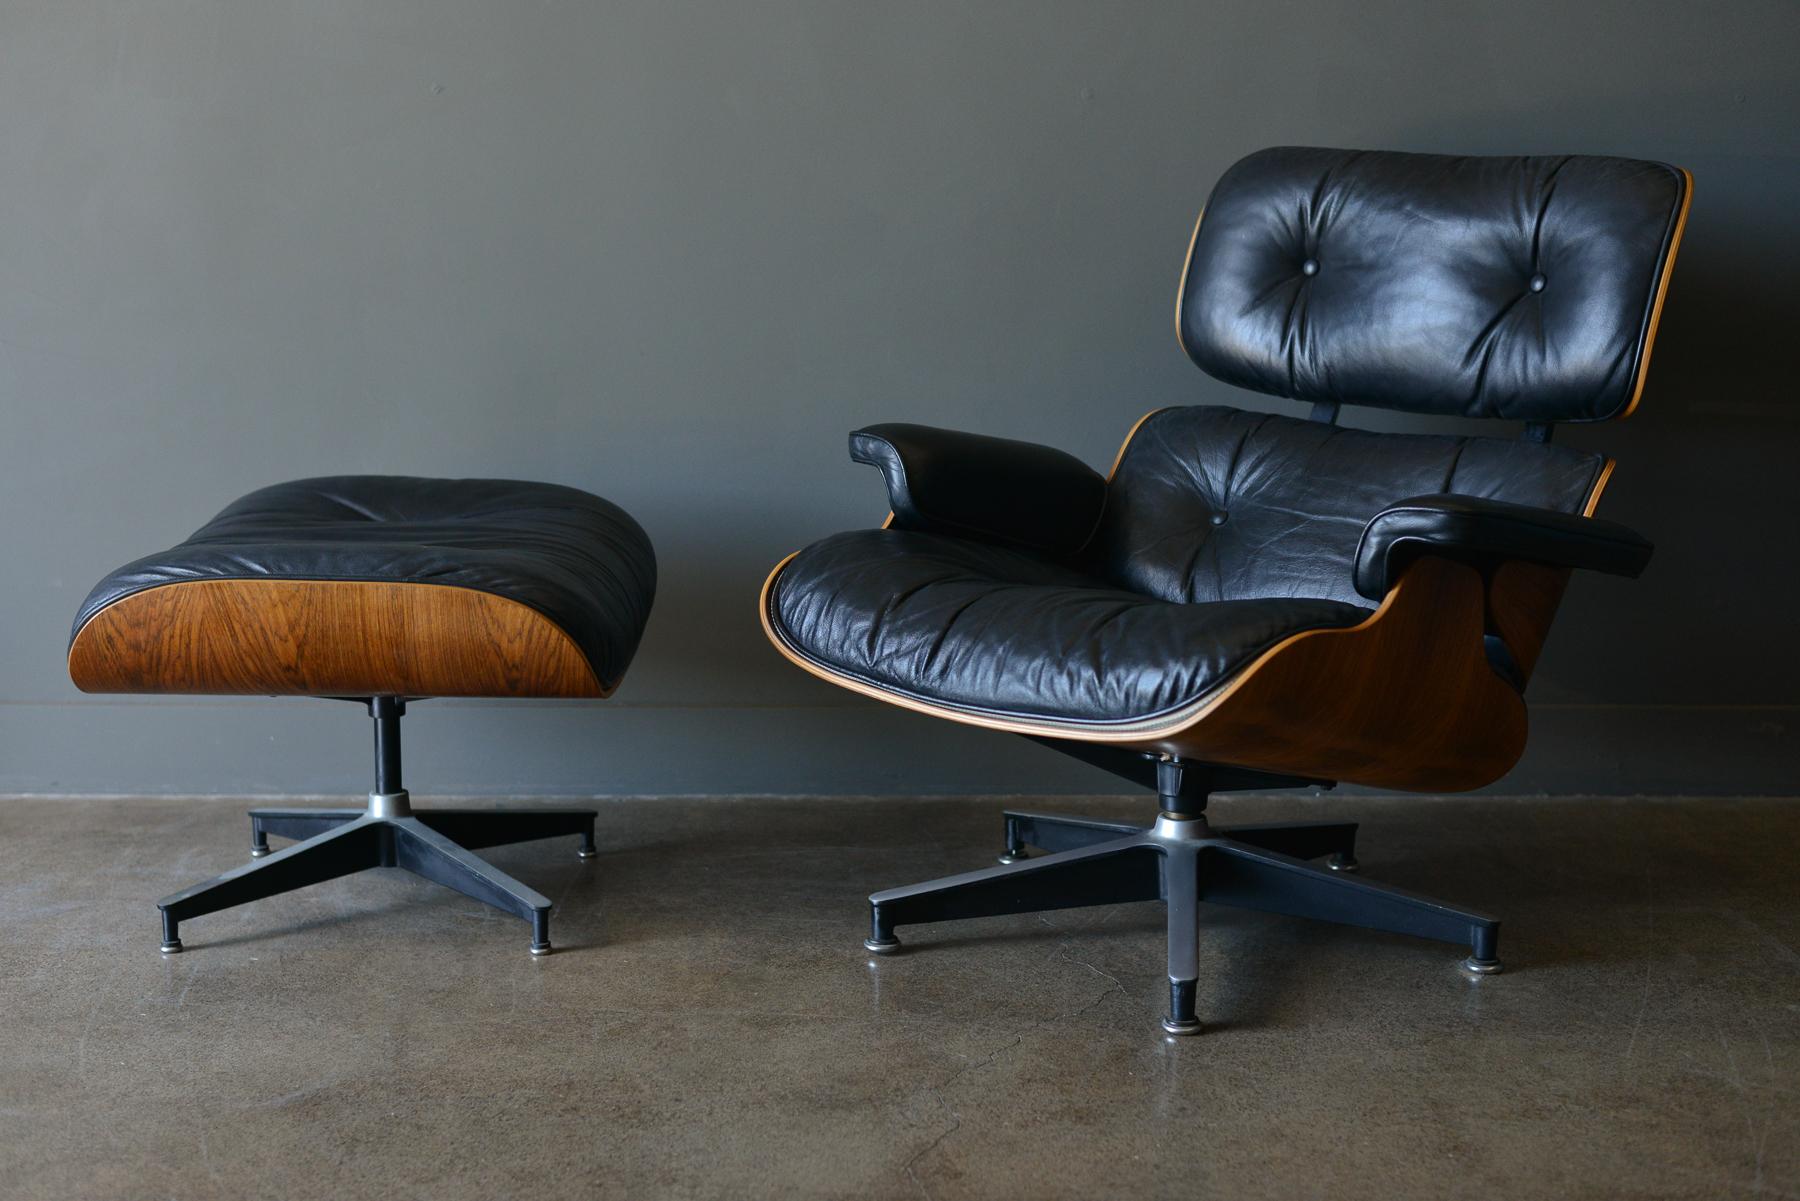 Eames rosewood lounge chair and ottoman, circa 1971. Original Charles Eames 670 and 671 lounge chair and ottoman for Herman Miller in black leather and rosewood. Beautiful patina to the leather, original 5 star base with domes of silence floor